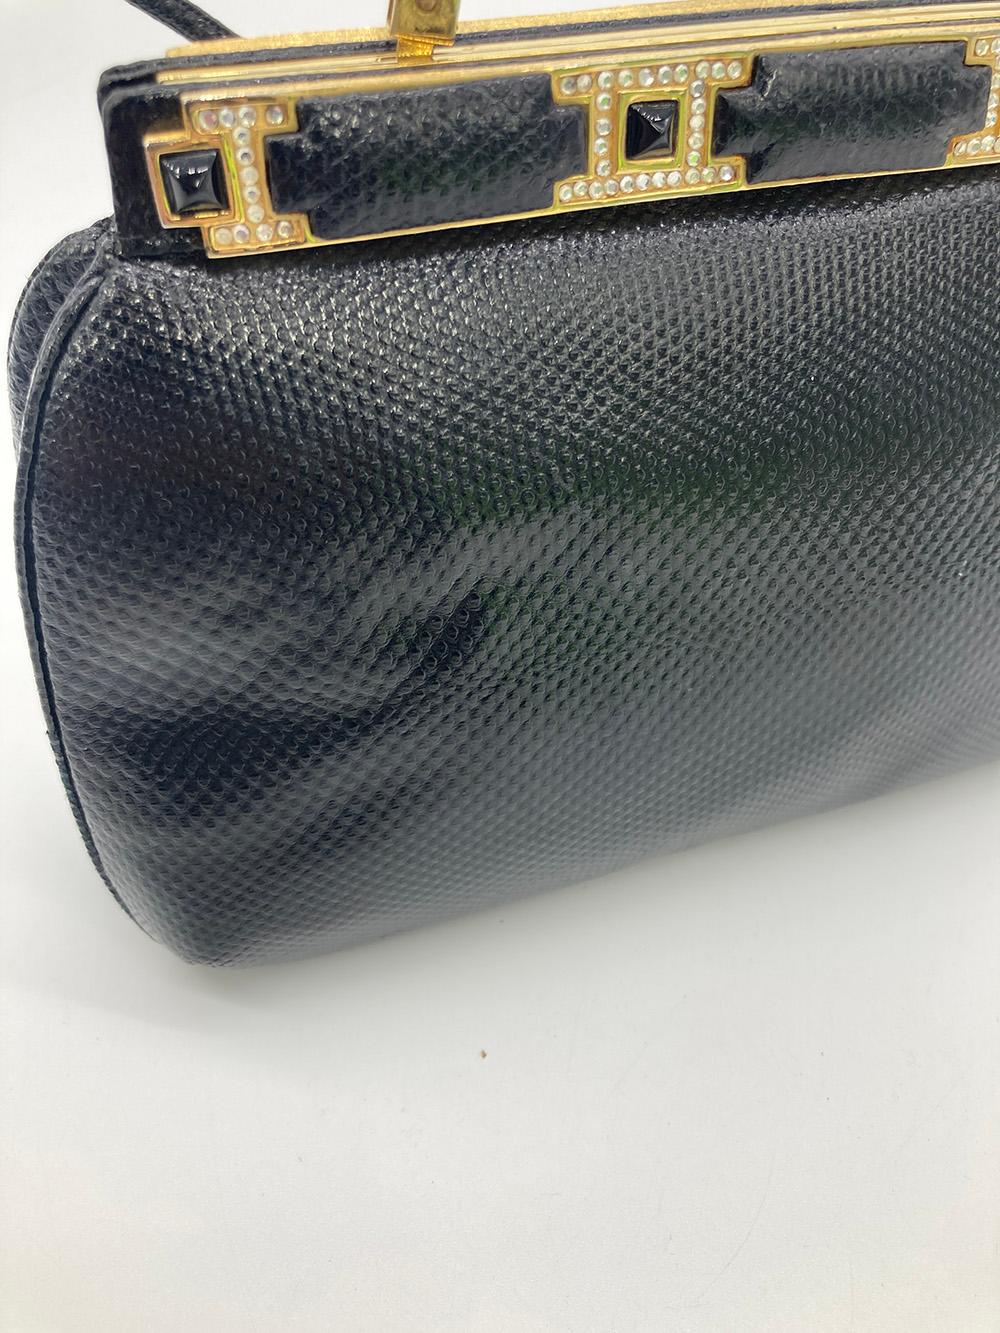 Judith Leiber Black Lizard Crystal and Leather Top Clutch For Sale 8